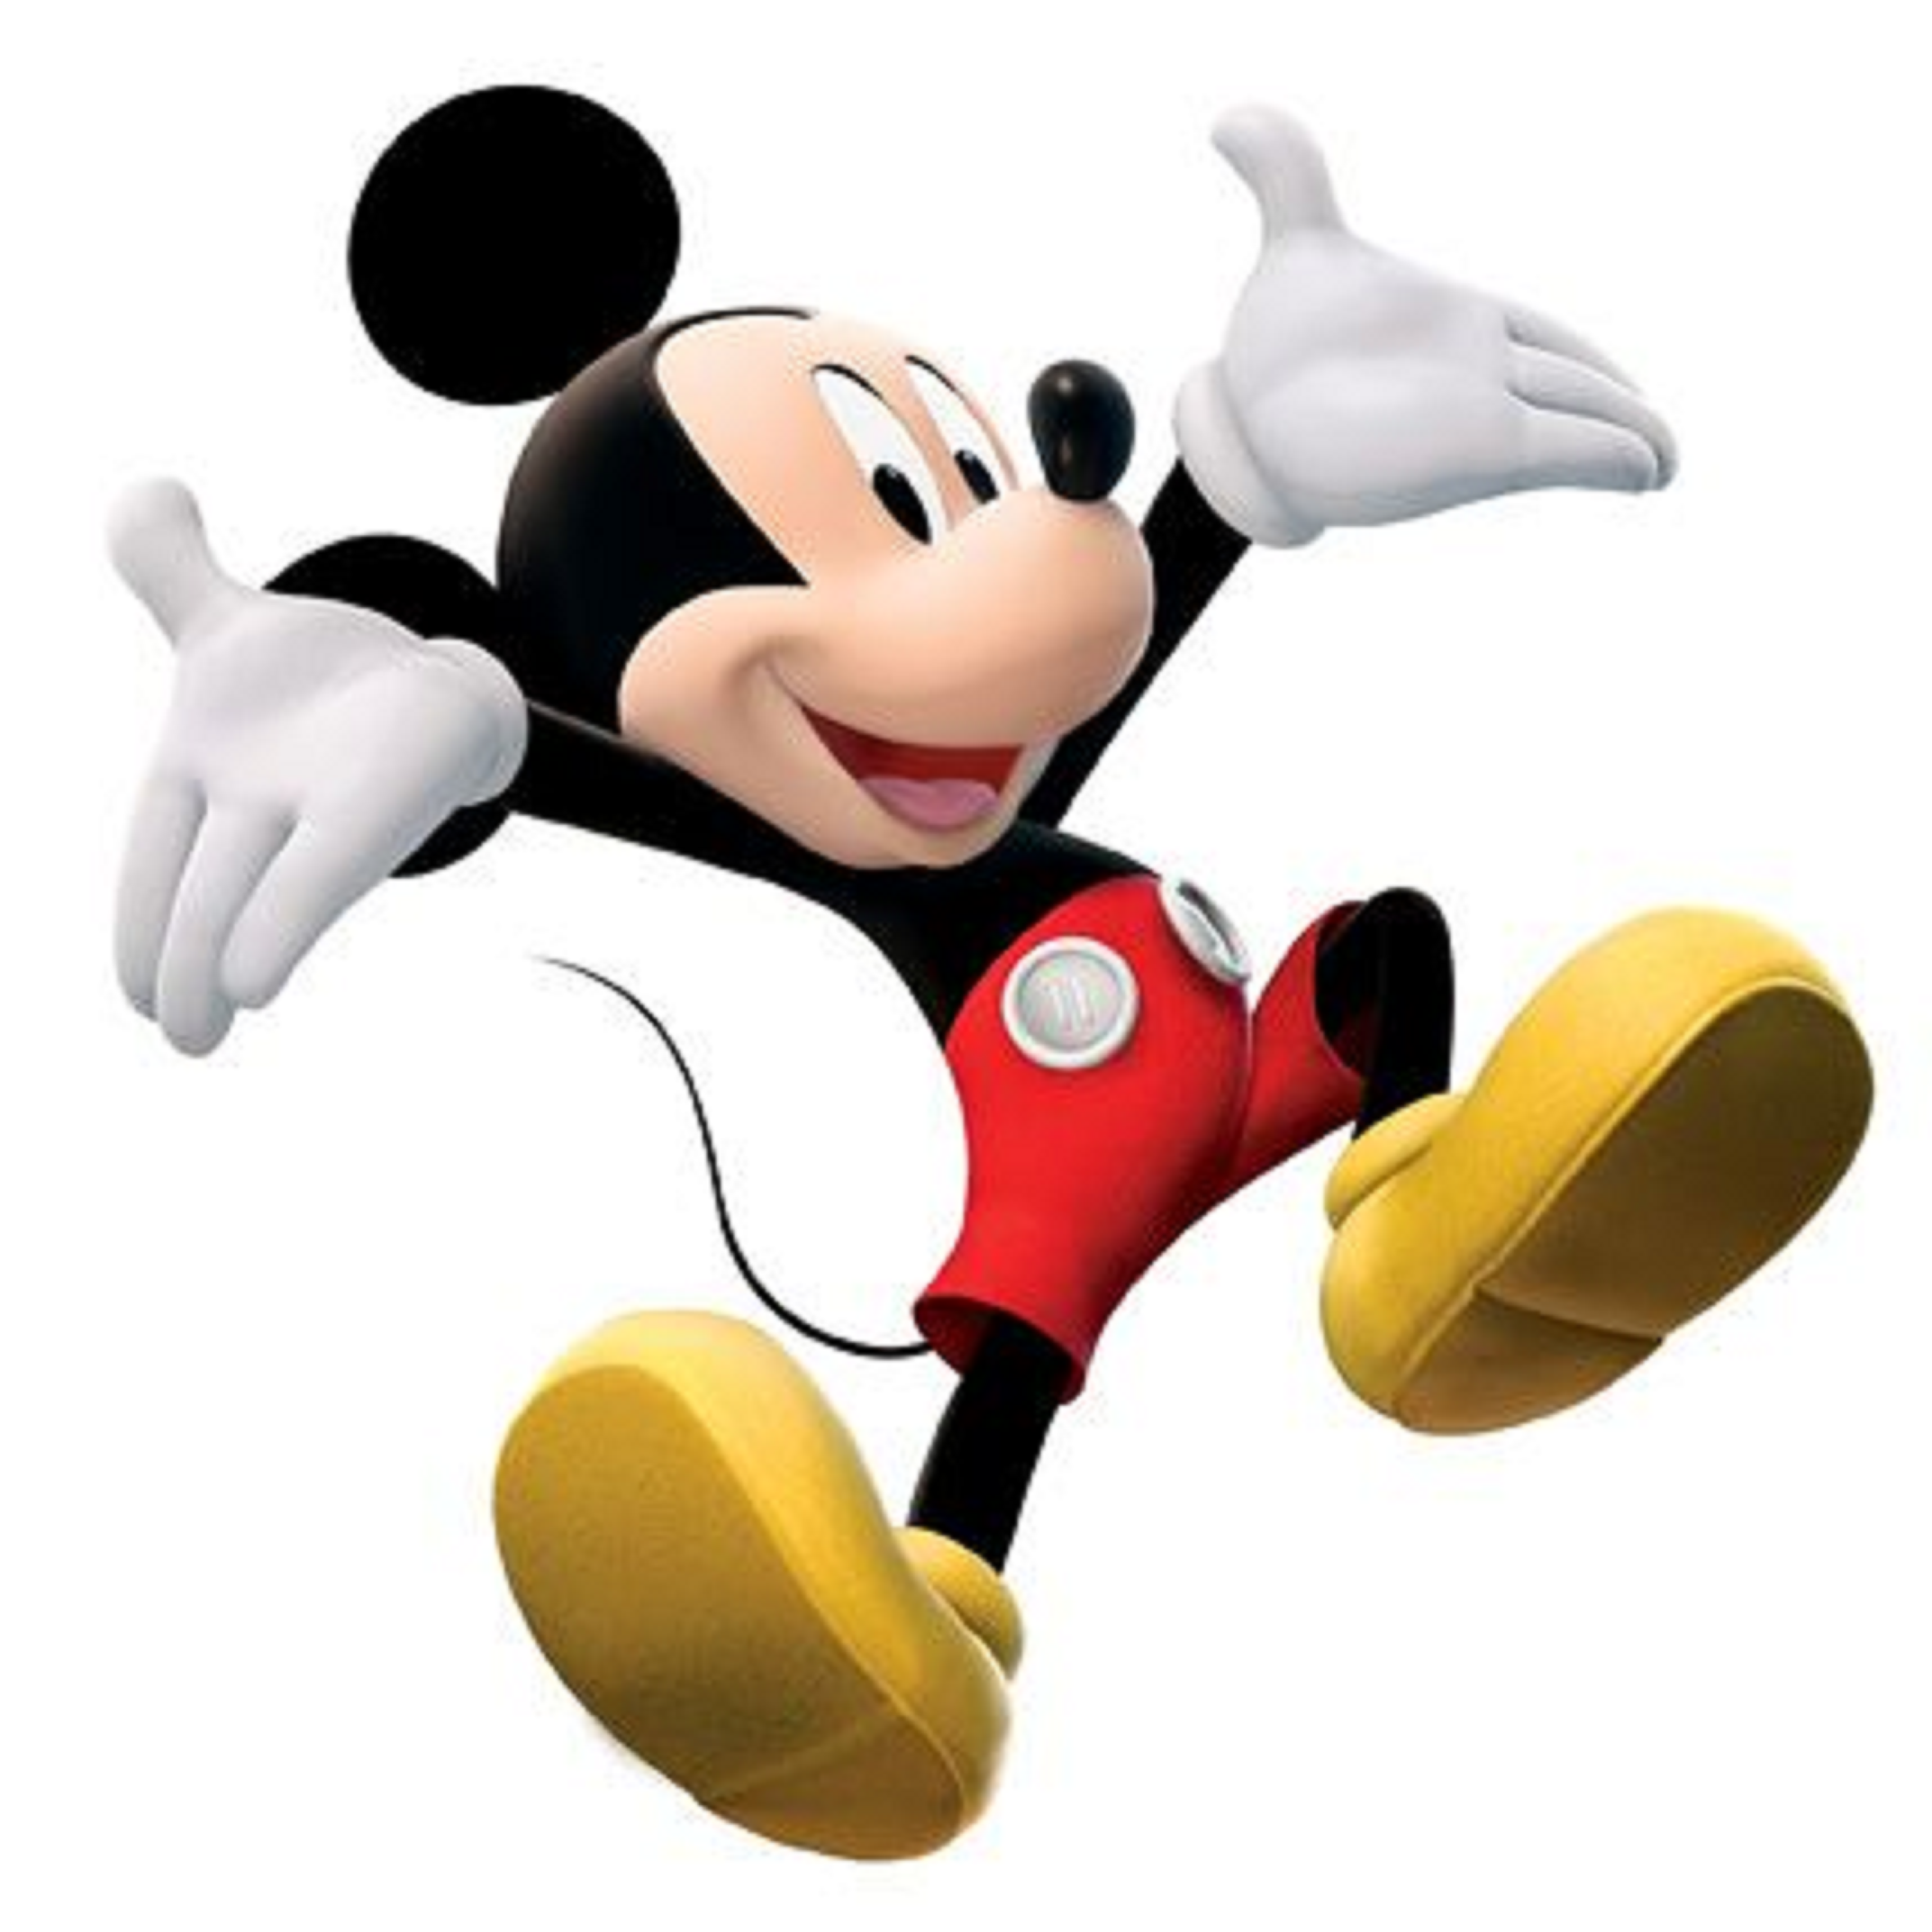 Mikey Mouse 49ers Clipart   Cliparthut   Free Clipart